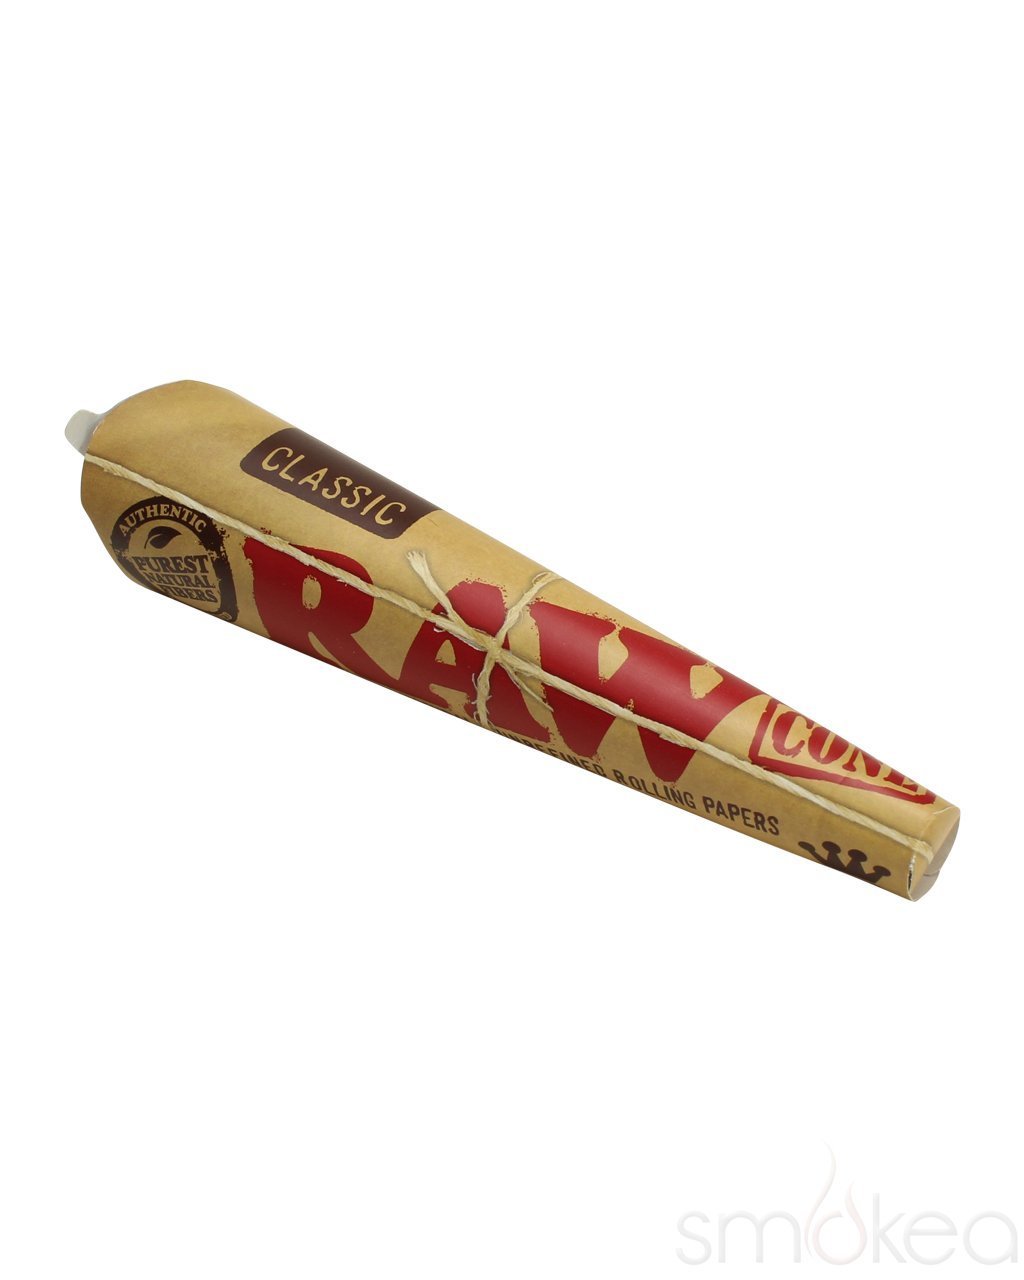 Raw Classic King Size Pre-Rolled Cones (Full Box) - Bittchaser Smoke Shop